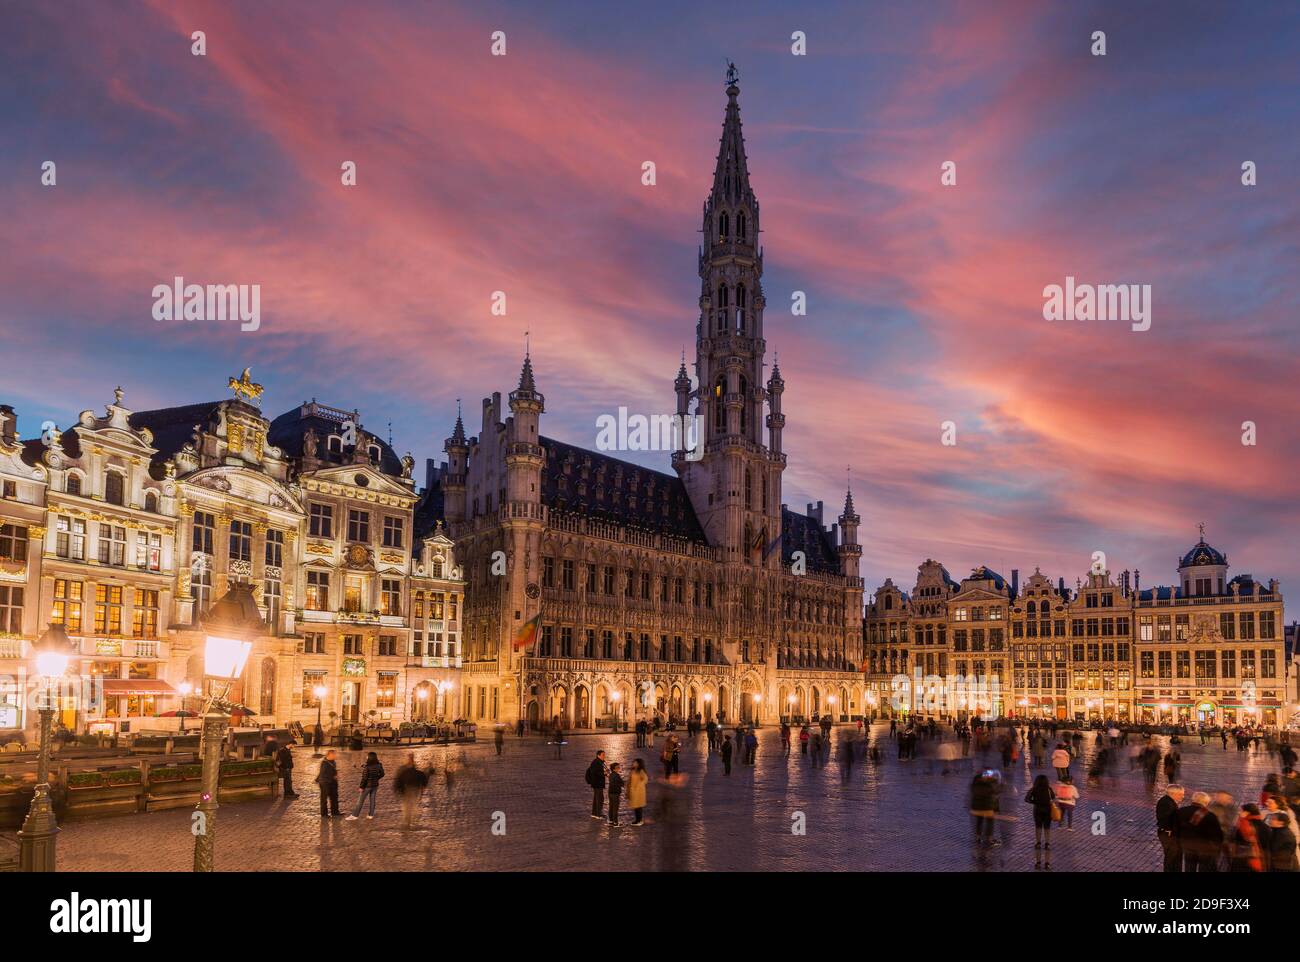 Sunset view over Grand Place with Hotel de Ville (City Hall) building, Brussels, Belgium Stock Photo